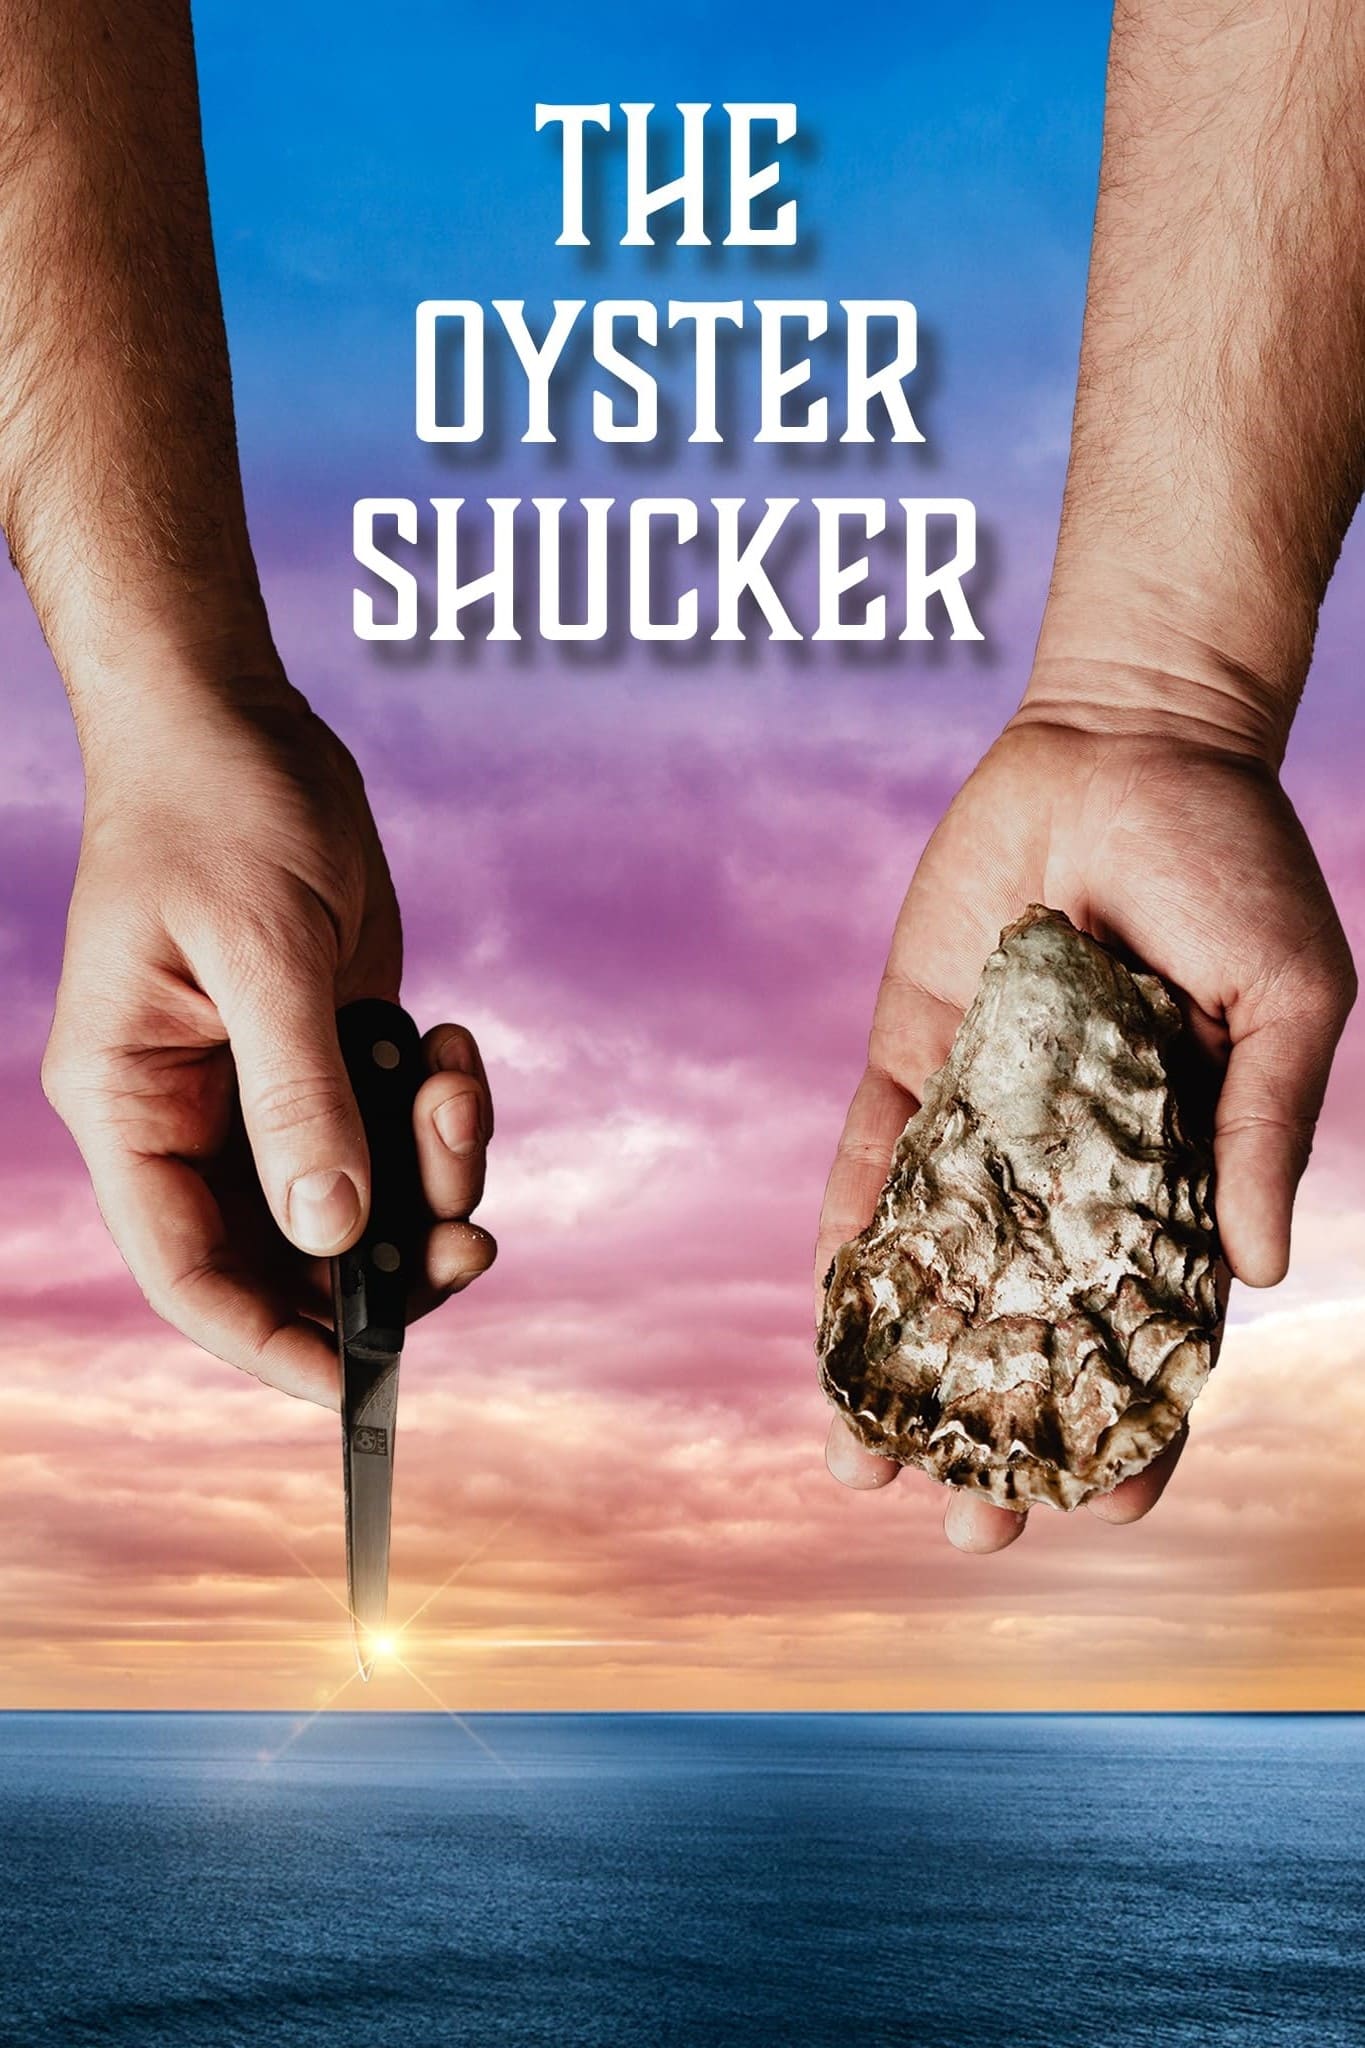 The Oyster Shucker